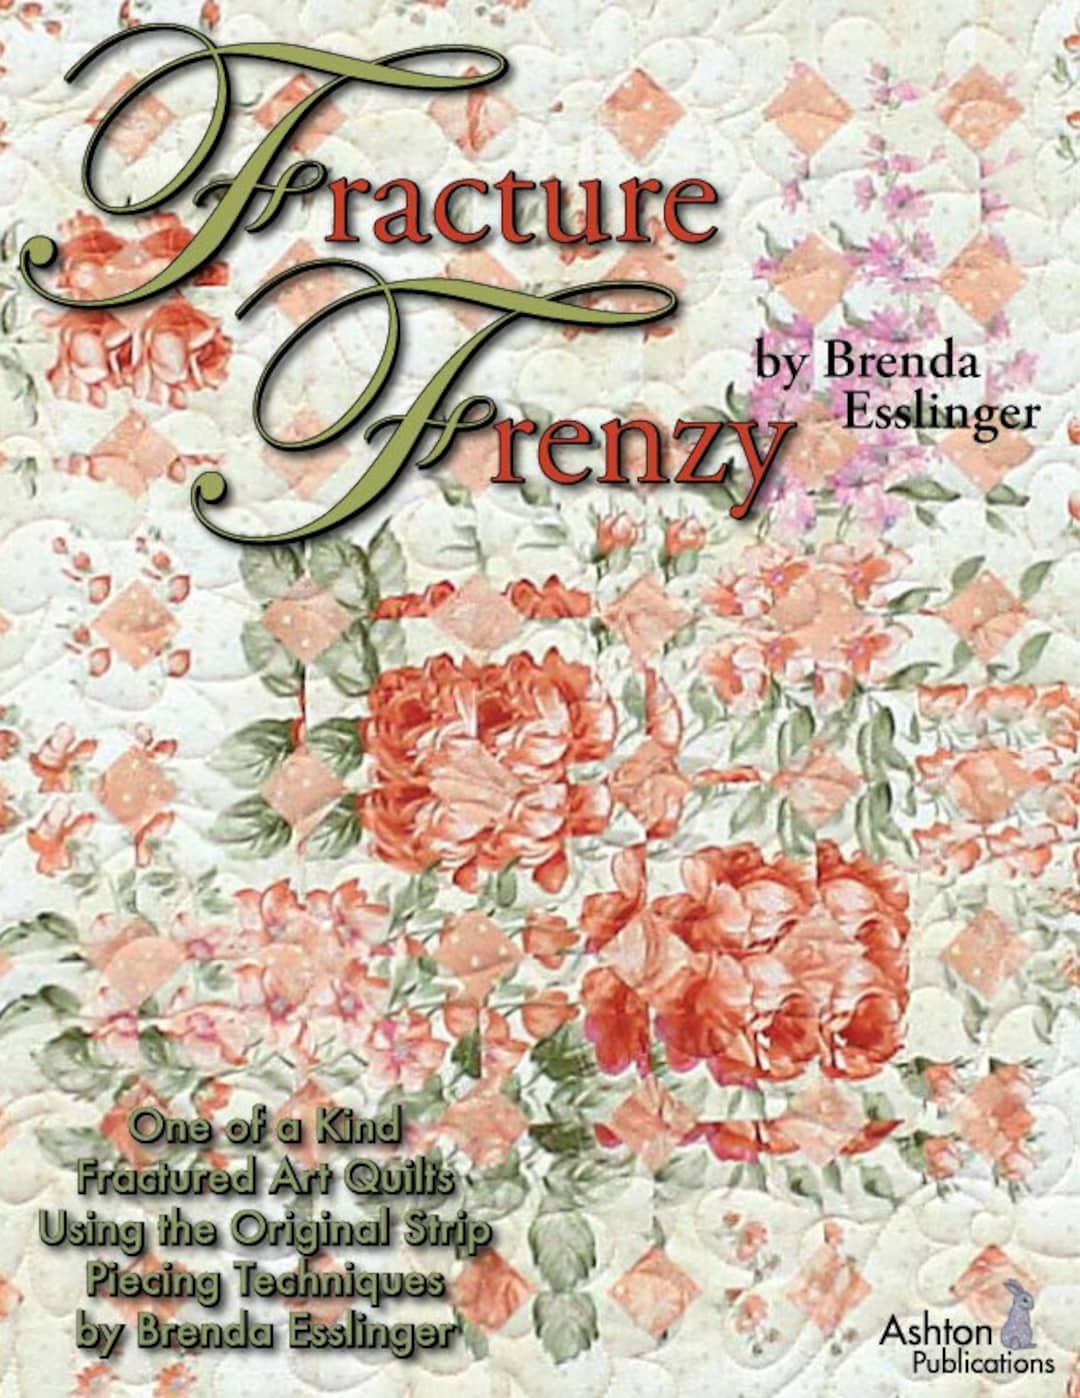 Fracture Frenzy